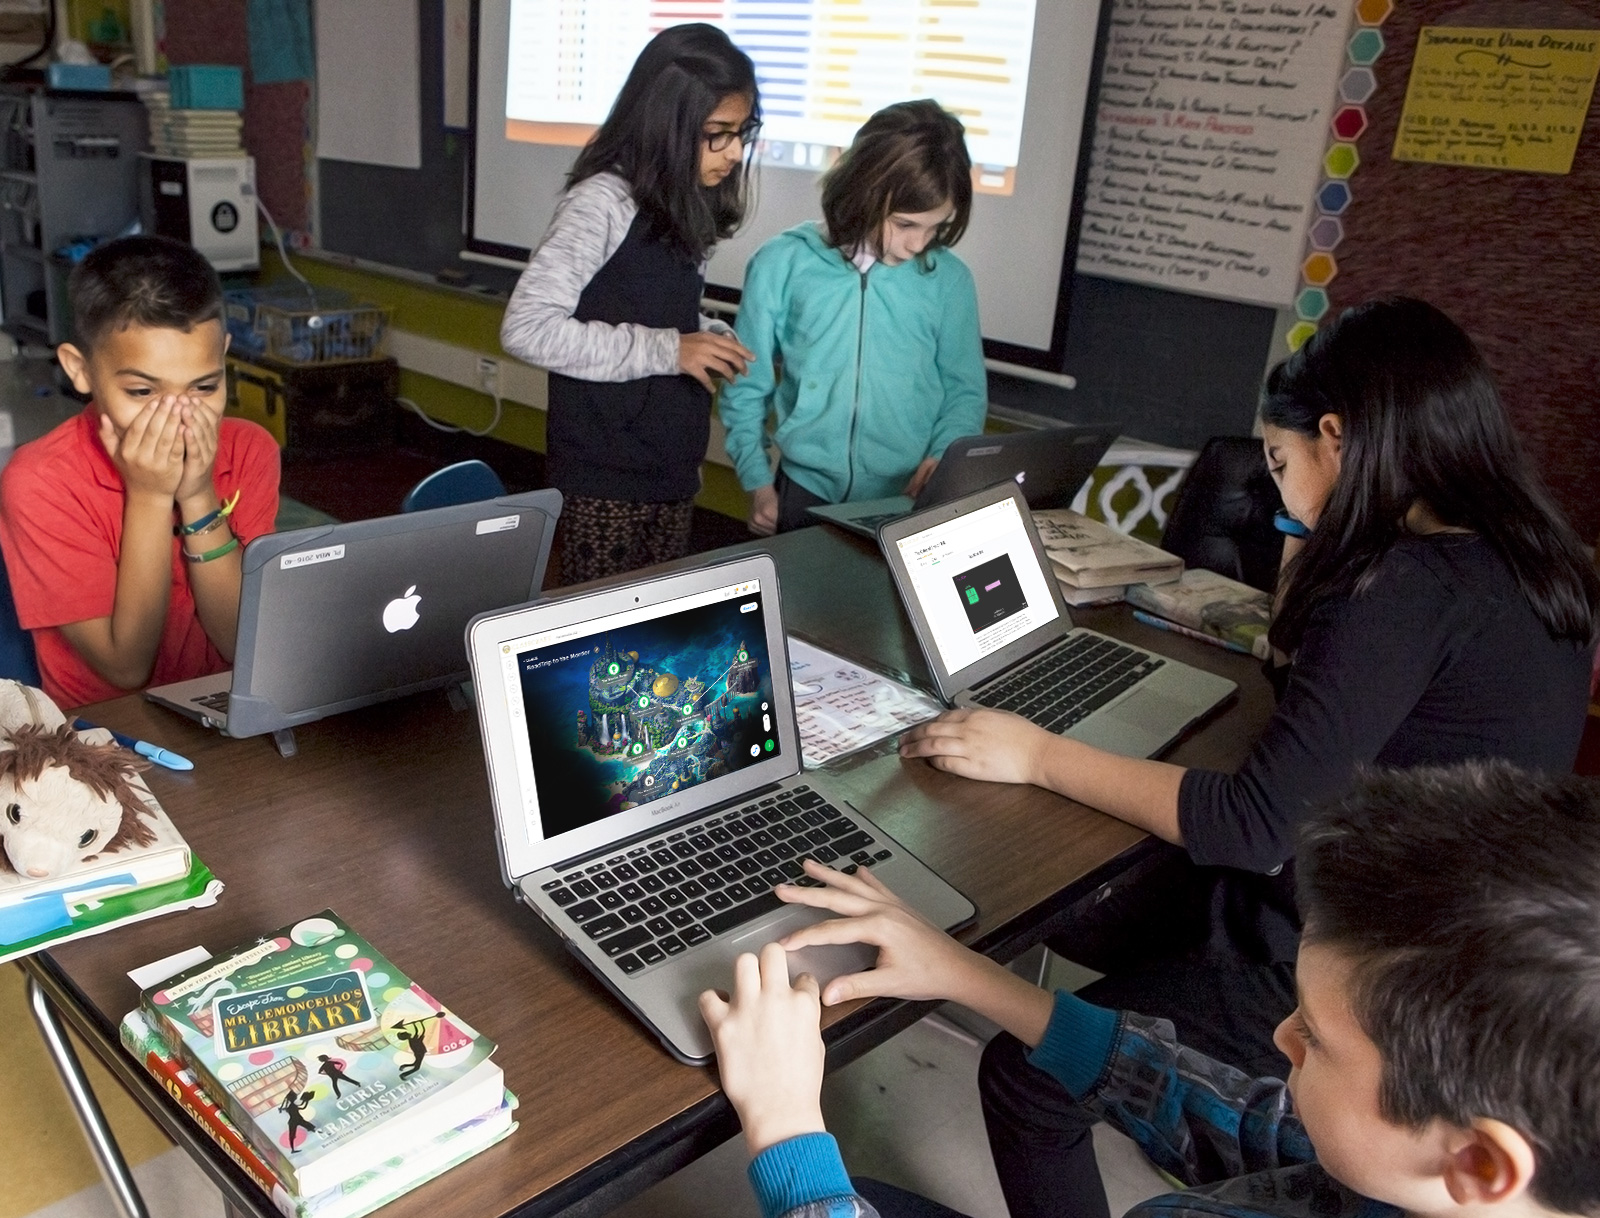 Classcraft, an award-winning ed-tech company serving more than 5 million students and educators worldwide, improves student motivation by gaming’s cultural relevance and power to create sustained engagement.